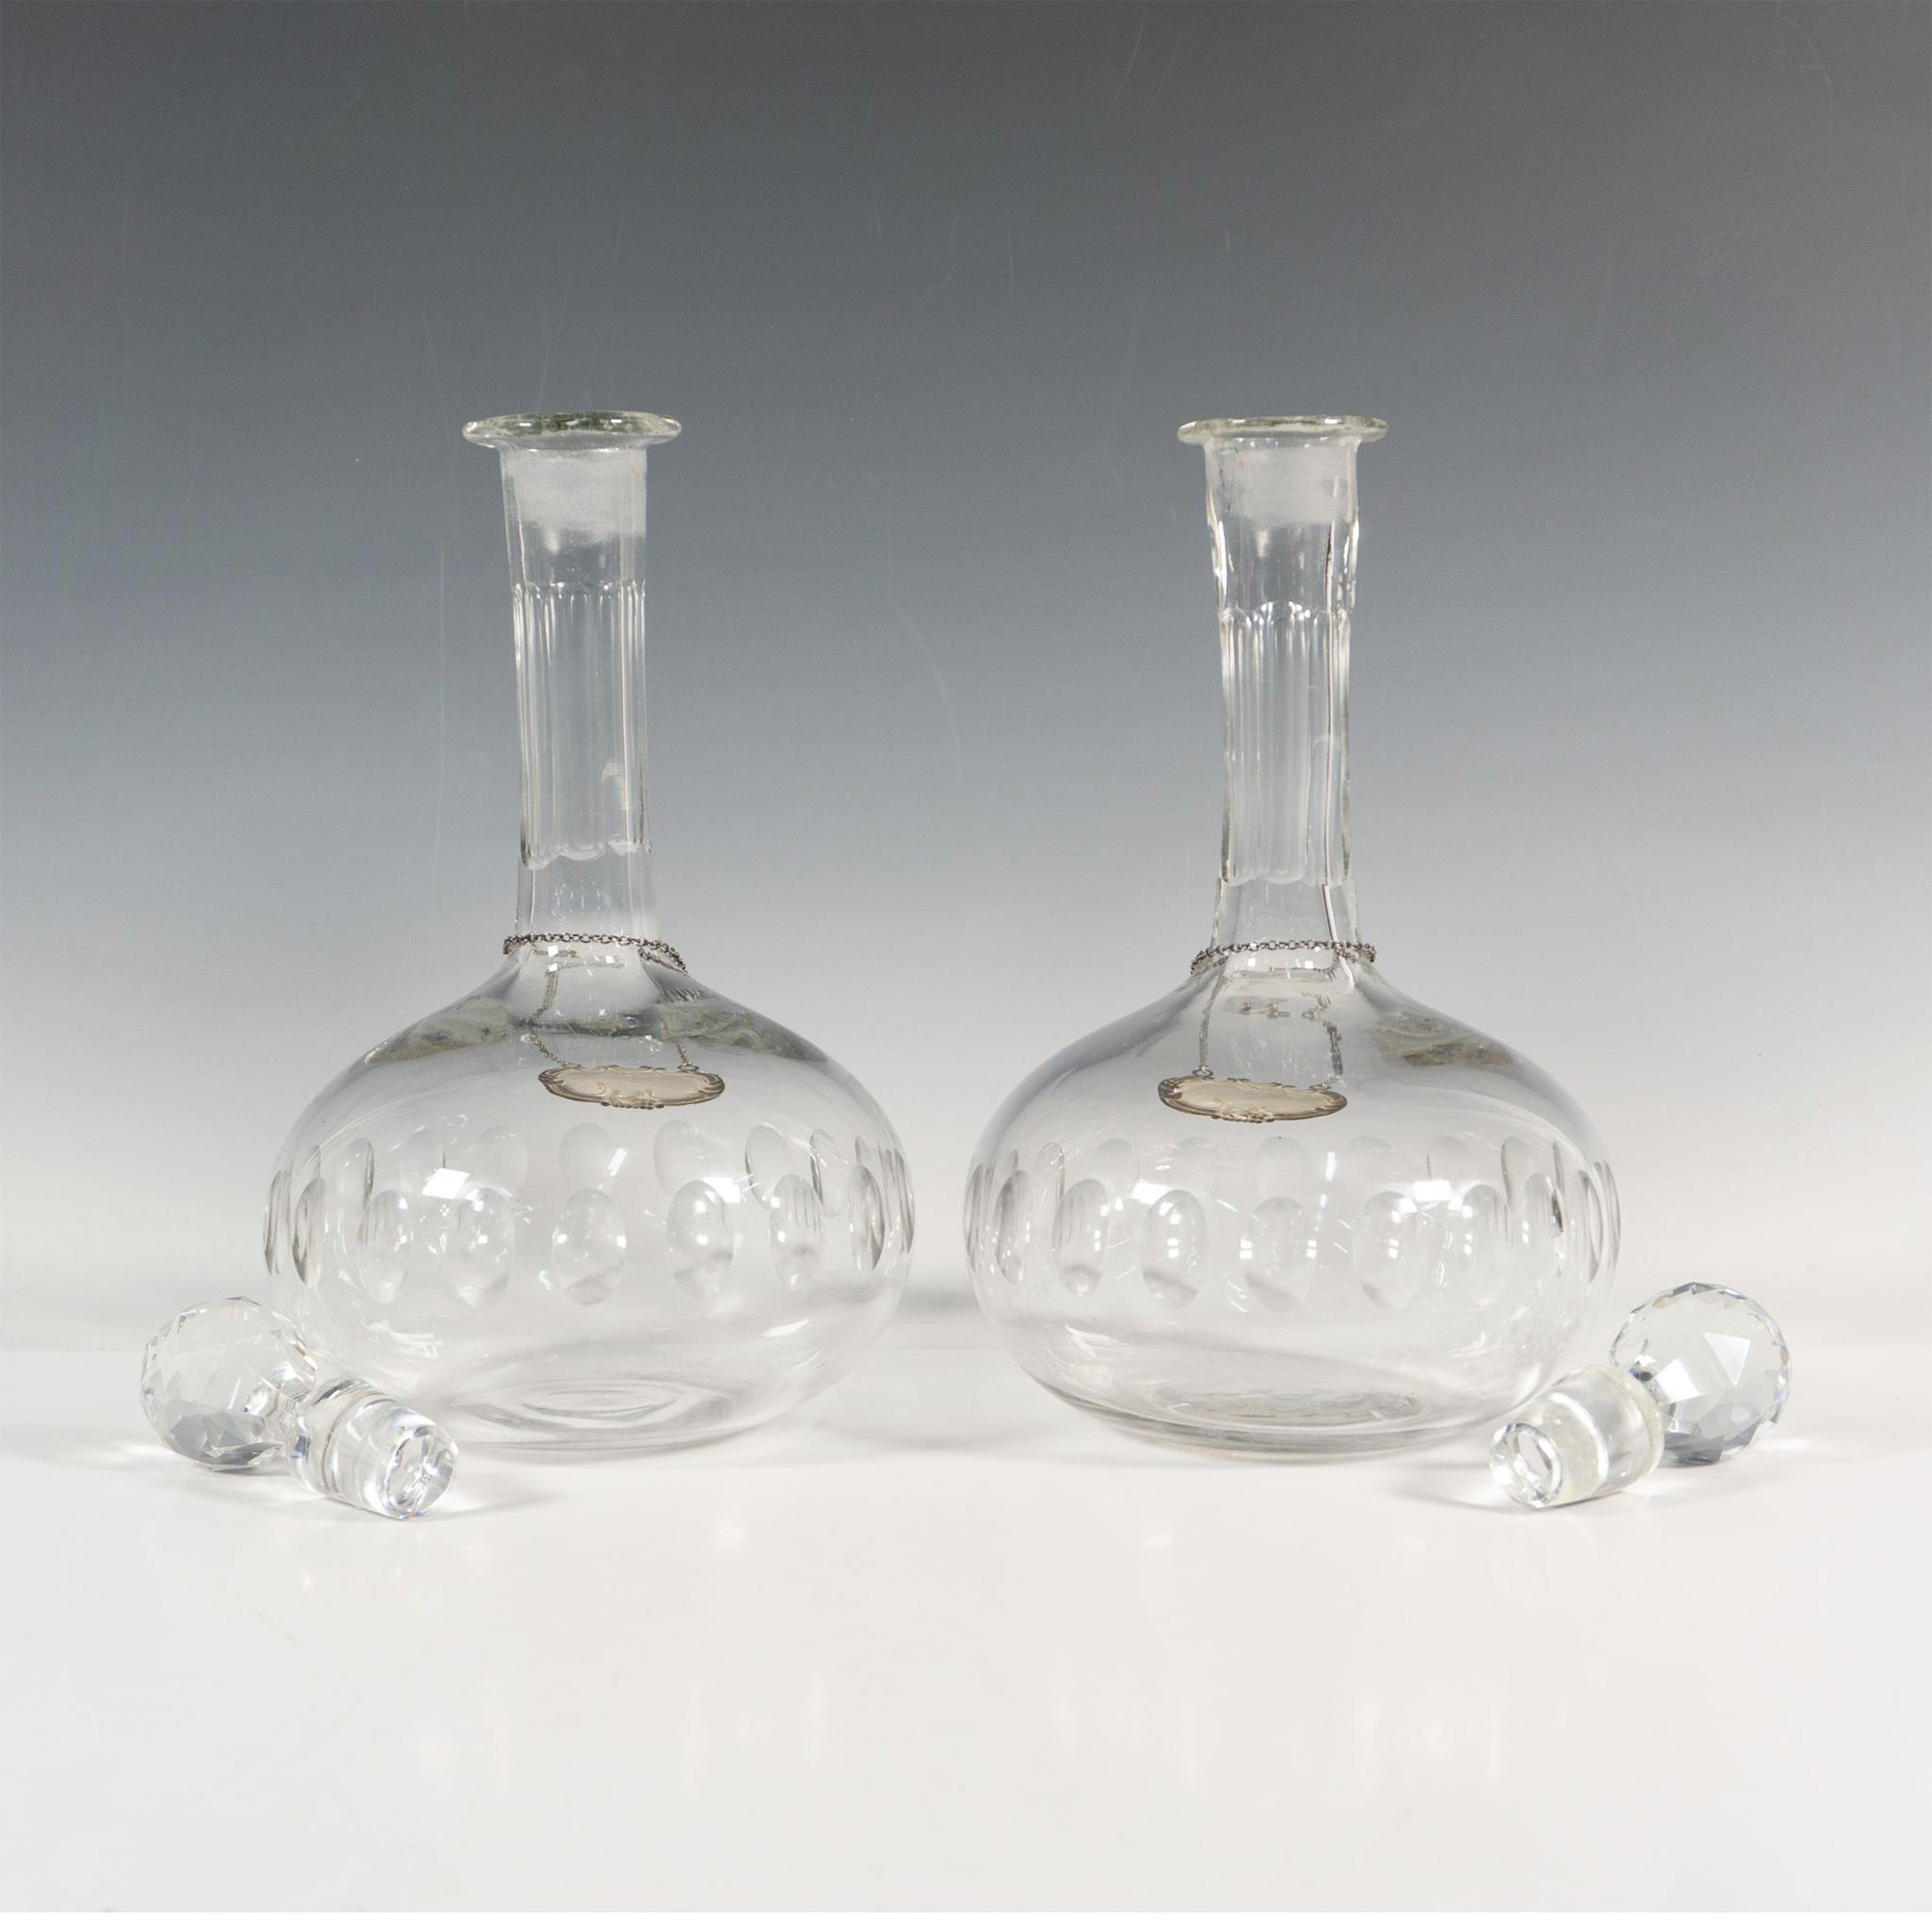 2pc Glass Decanters with Sterling Silver Liquor Tags - Image 3 of 4